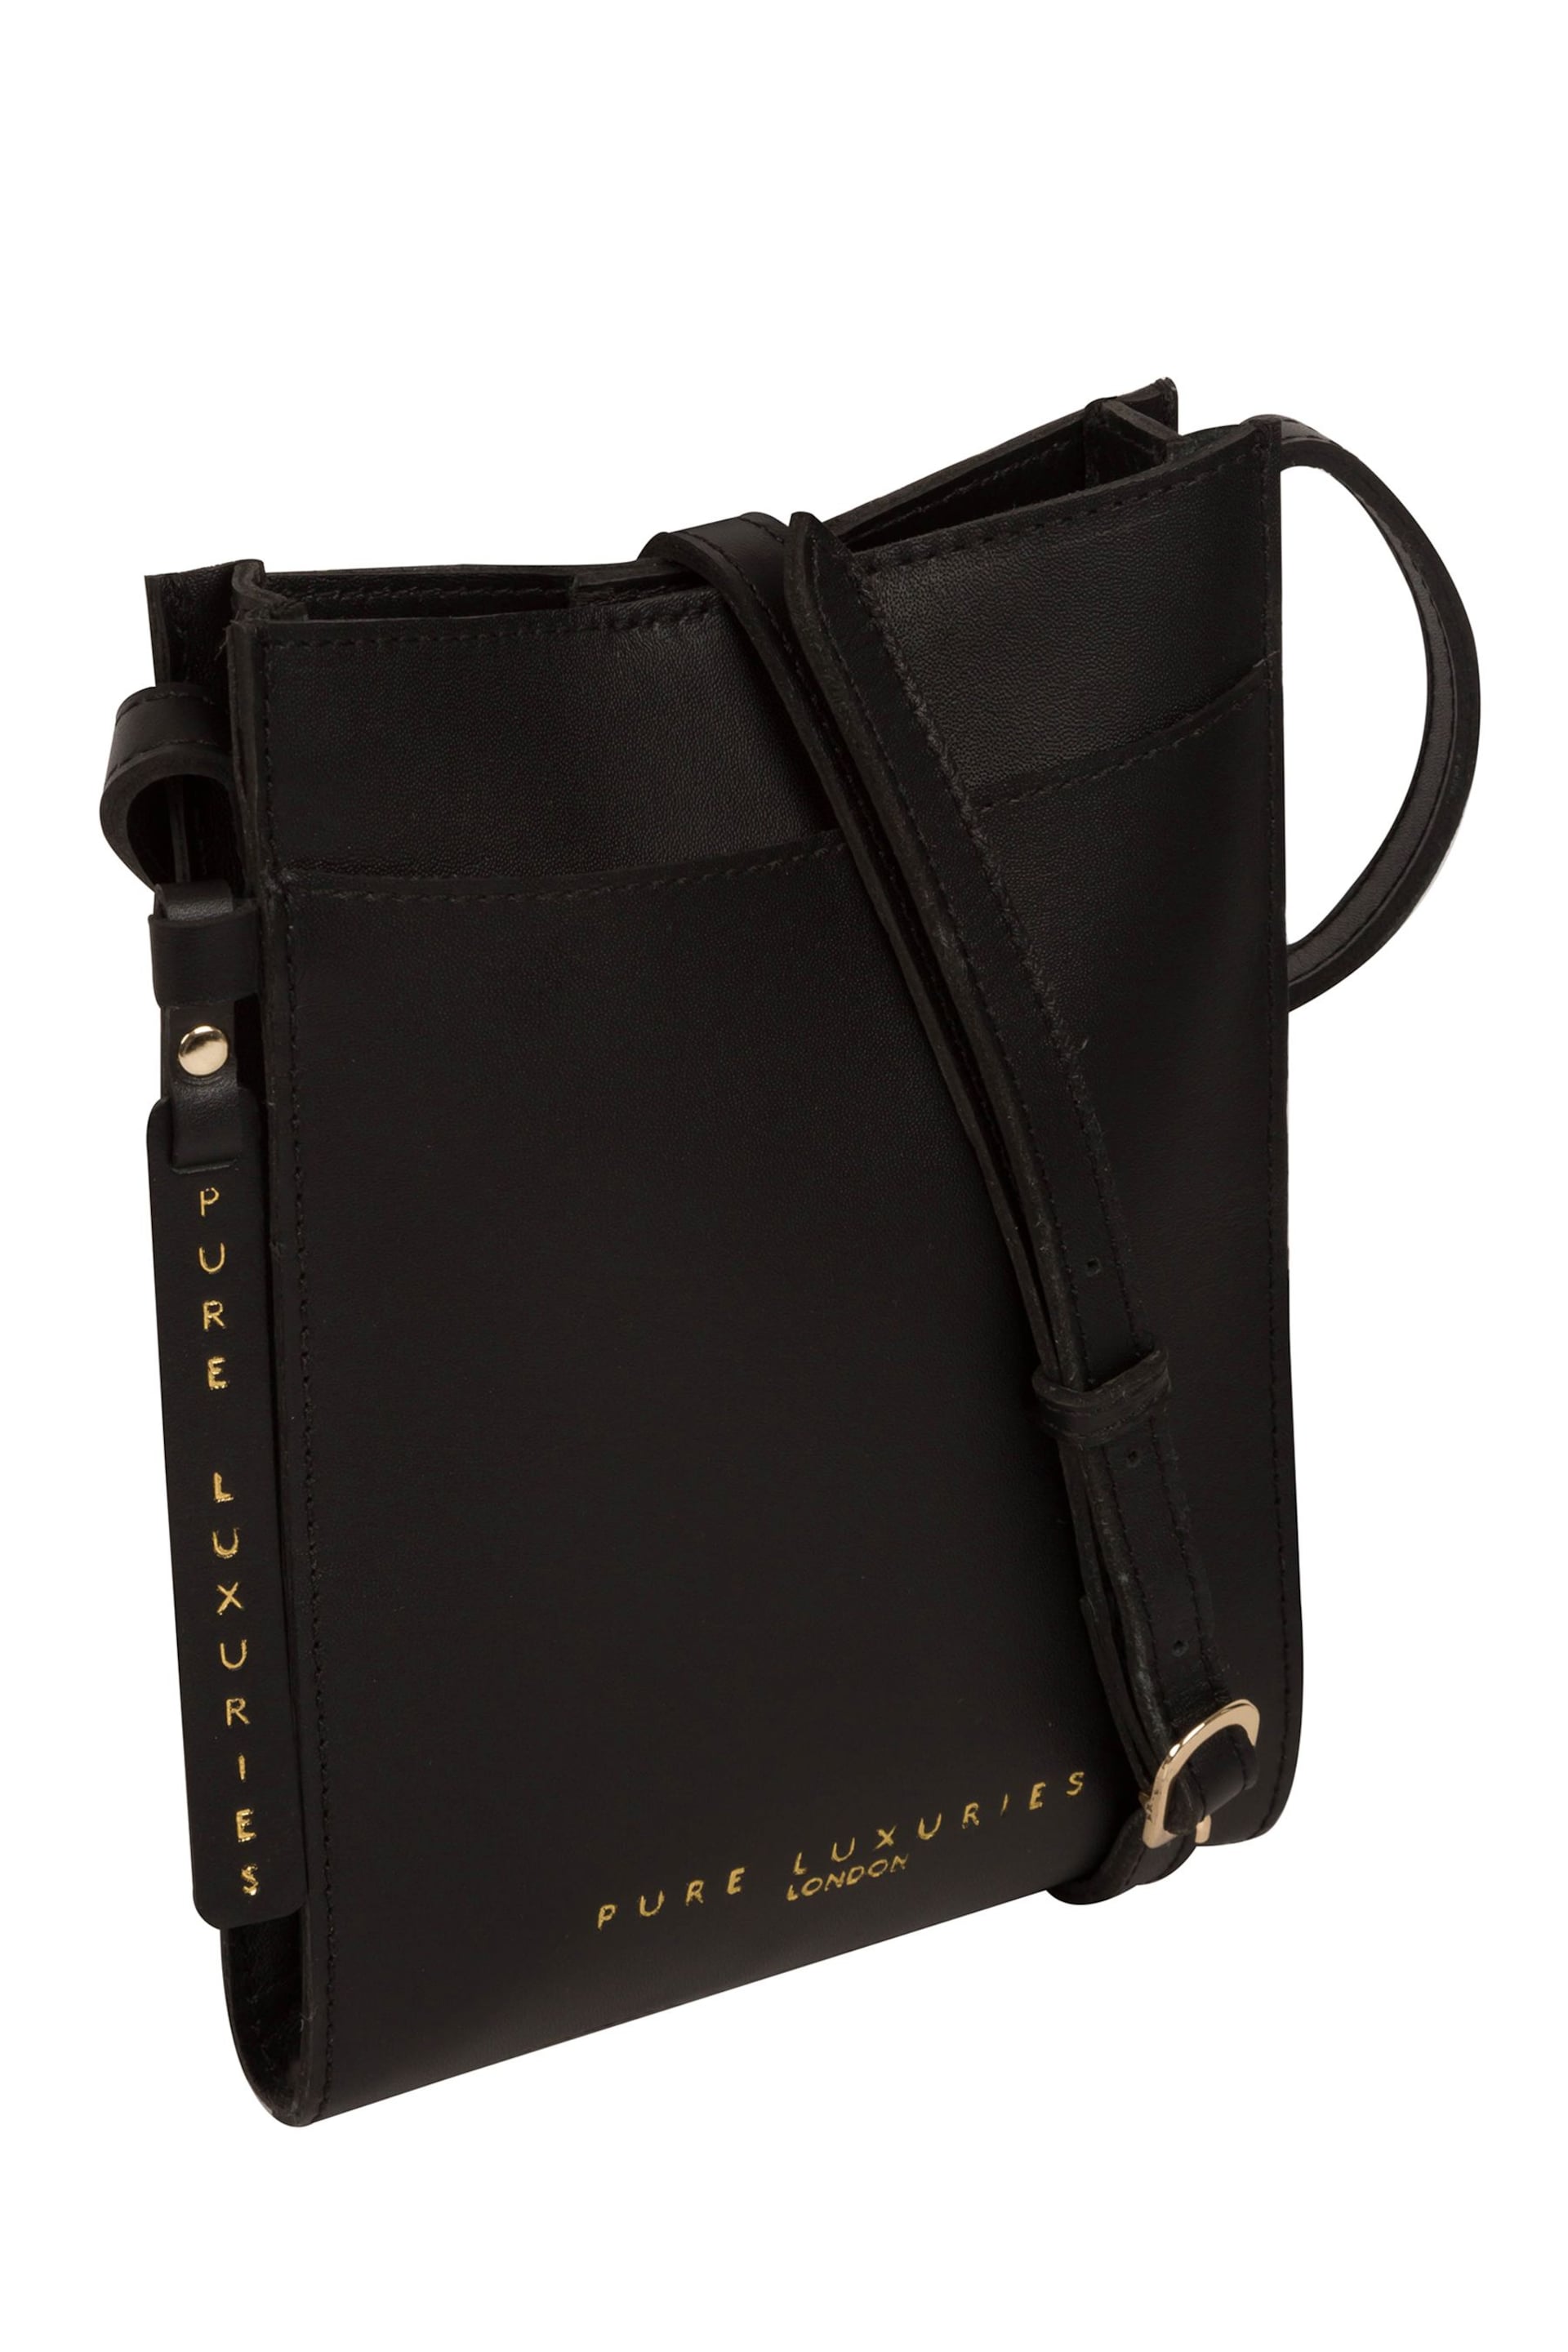 Pure Luxuries London Barton Vegetable Tanned Leather Cross-Body Phone Bag - Image 5 of 5